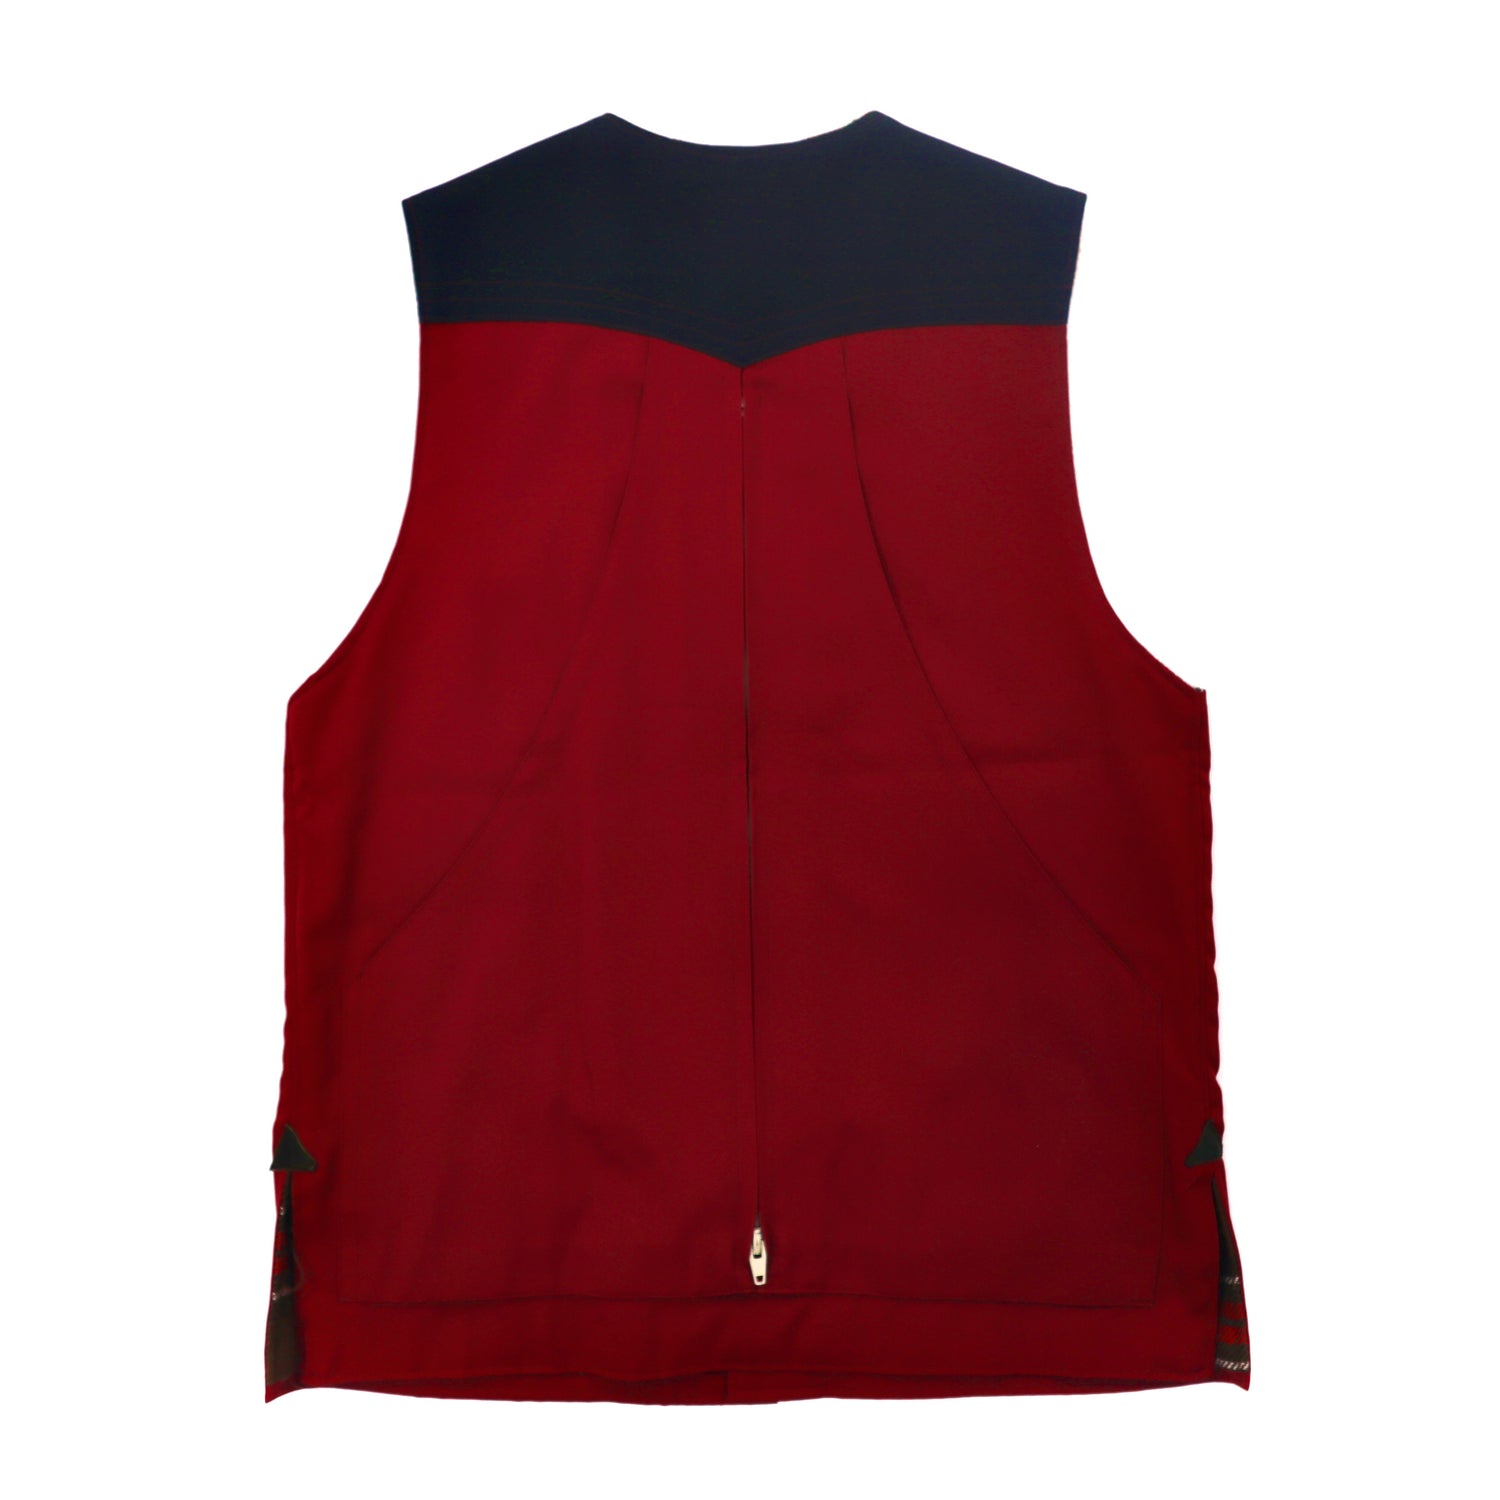 K.F.C. SPORTS WEAR Hunting Vest M BORDEAUX Lining Checked Union 